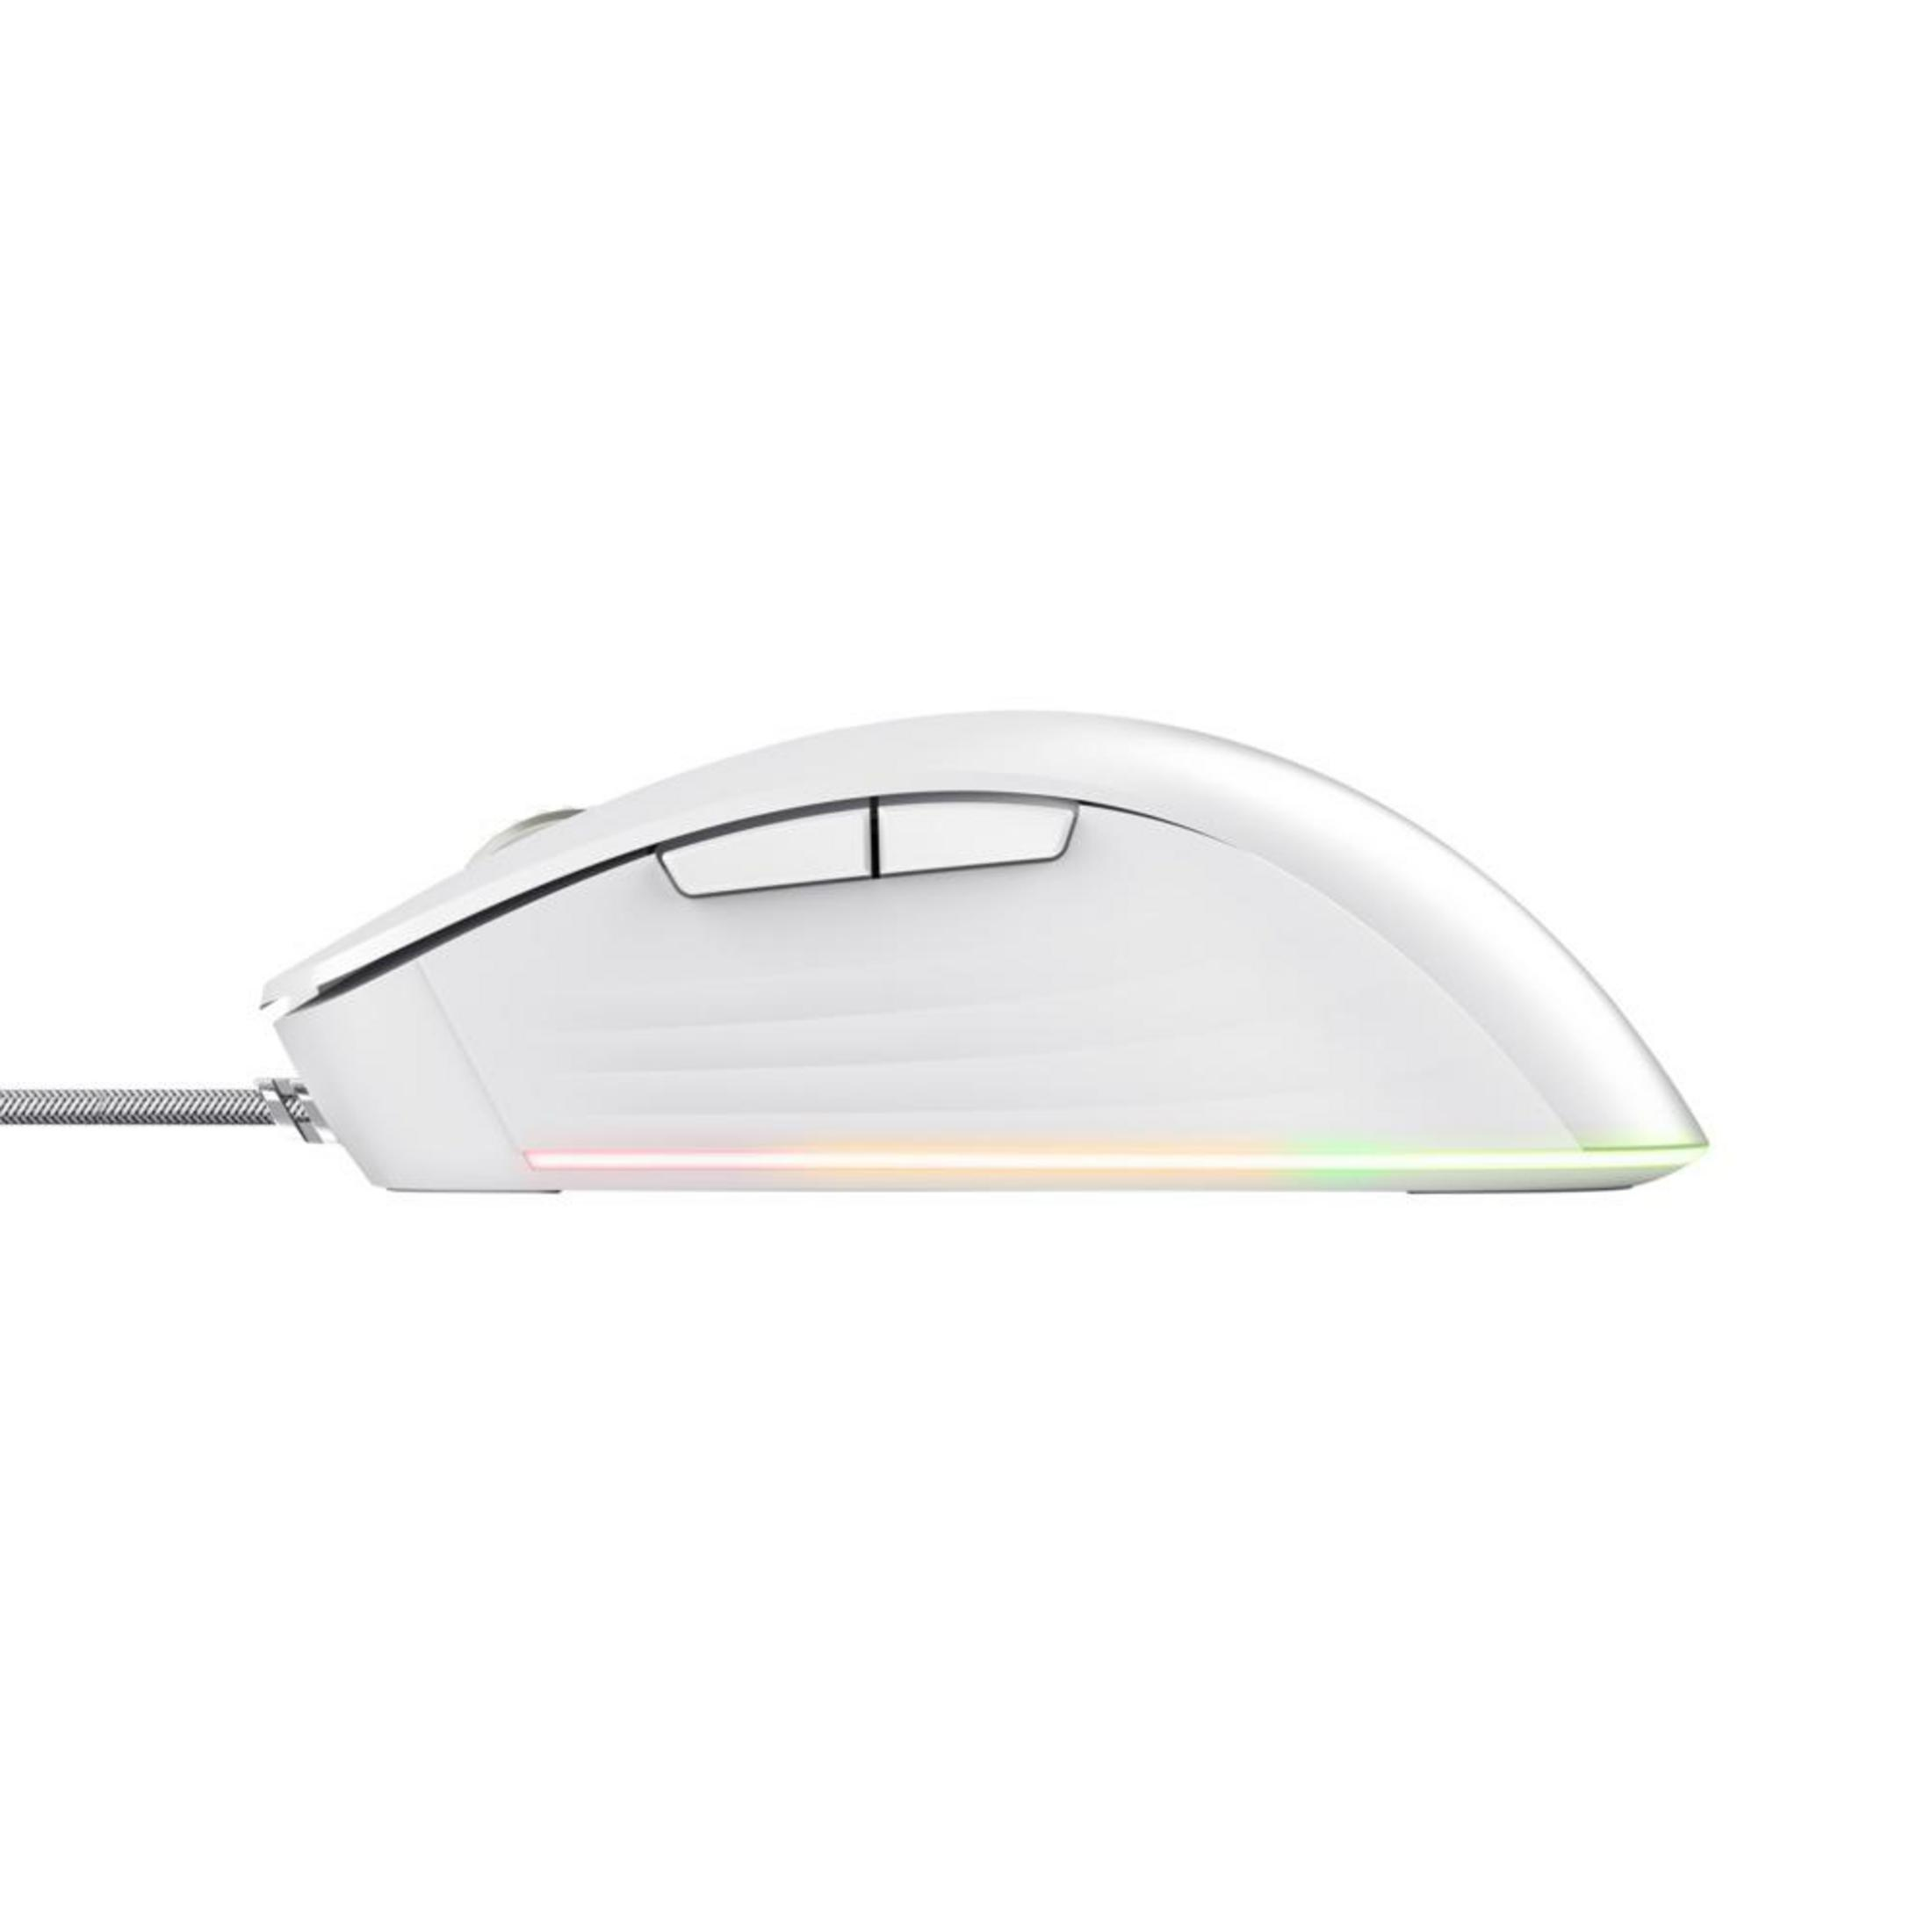 TRUST 24891 GXT924W YBAR+ Gaming GAMING Weiß WHITE Maus, MOUSE